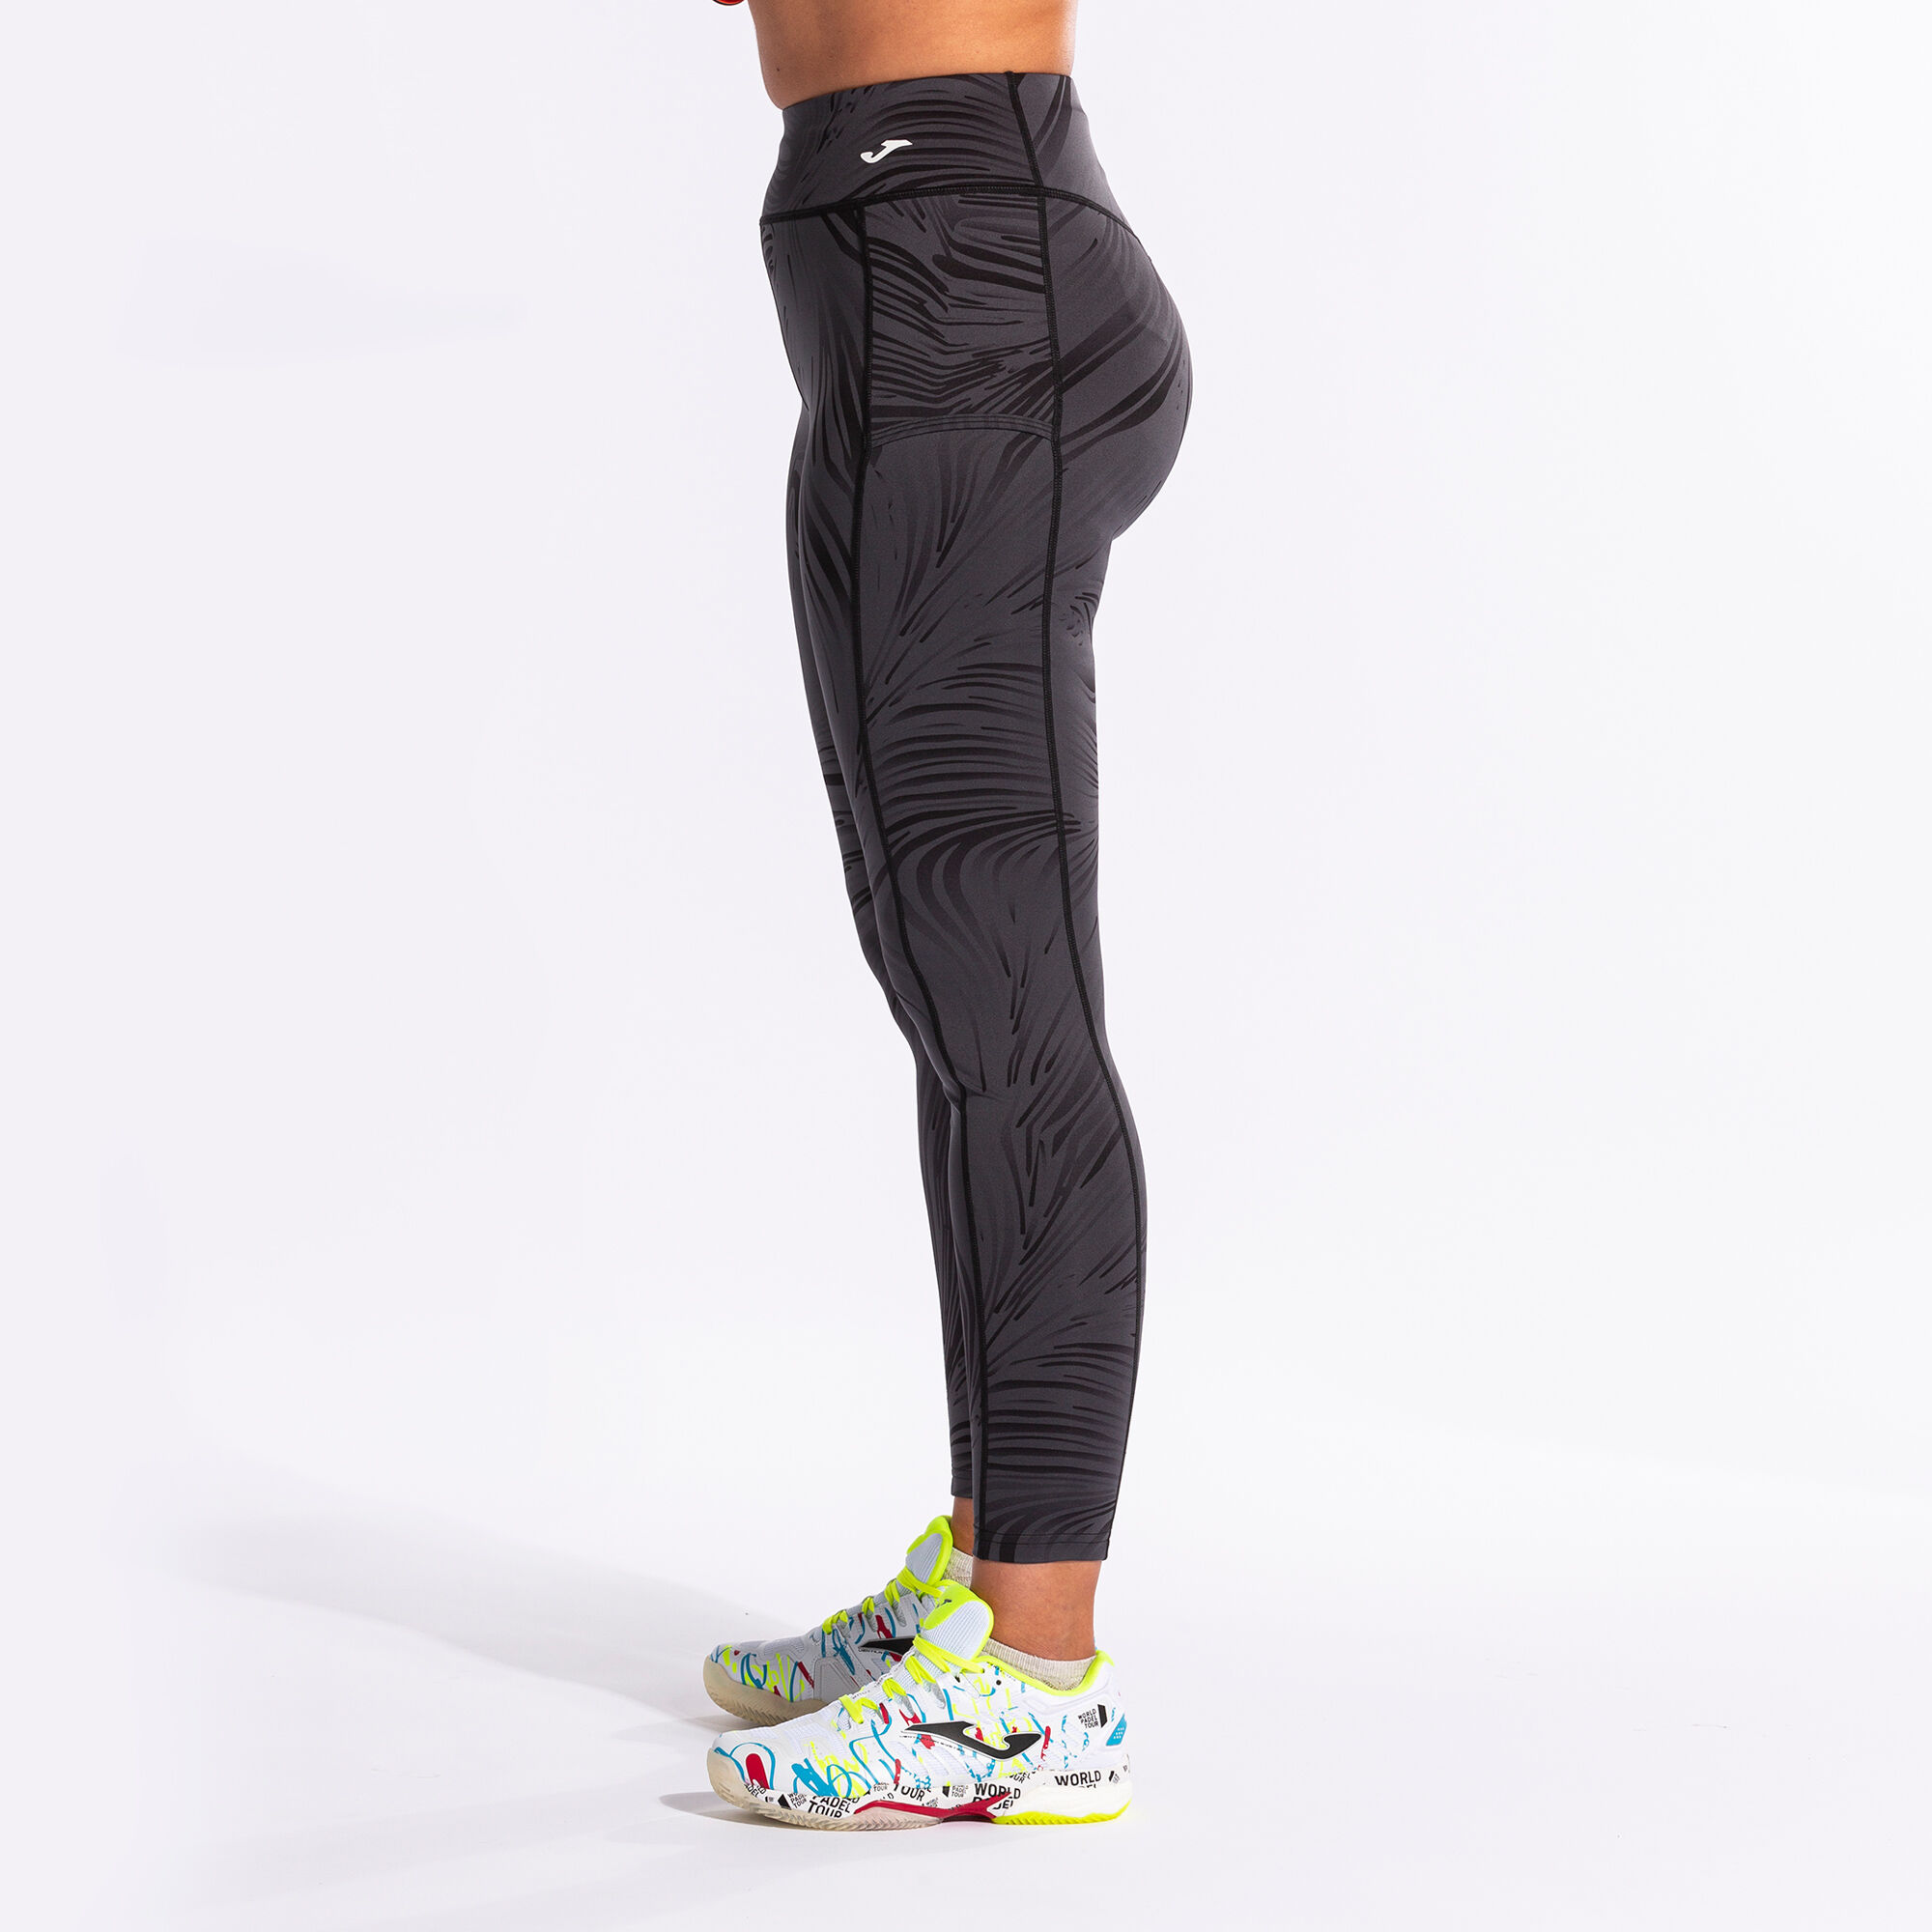 Joma Jordan - Compression tights with flat seams to avoid